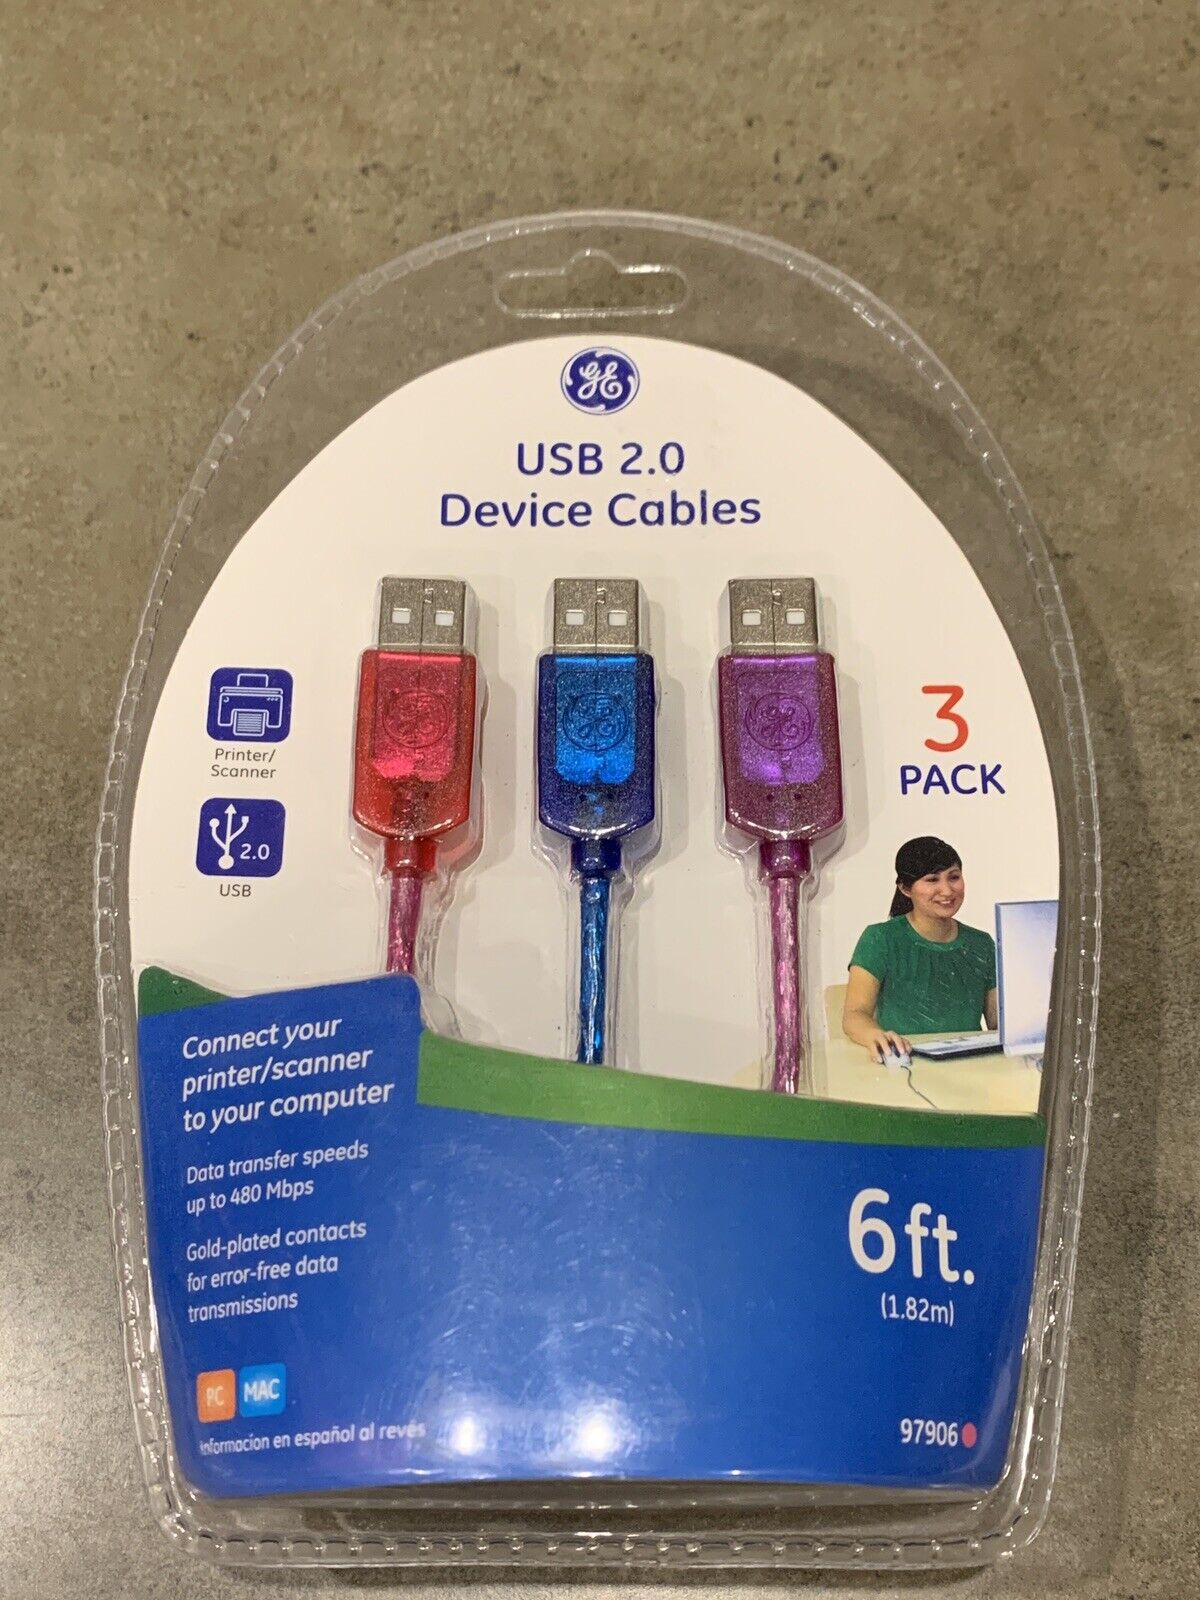 GE USB 2.0 Device Cables (3 Pack) – #HO97906 – New/Sealed